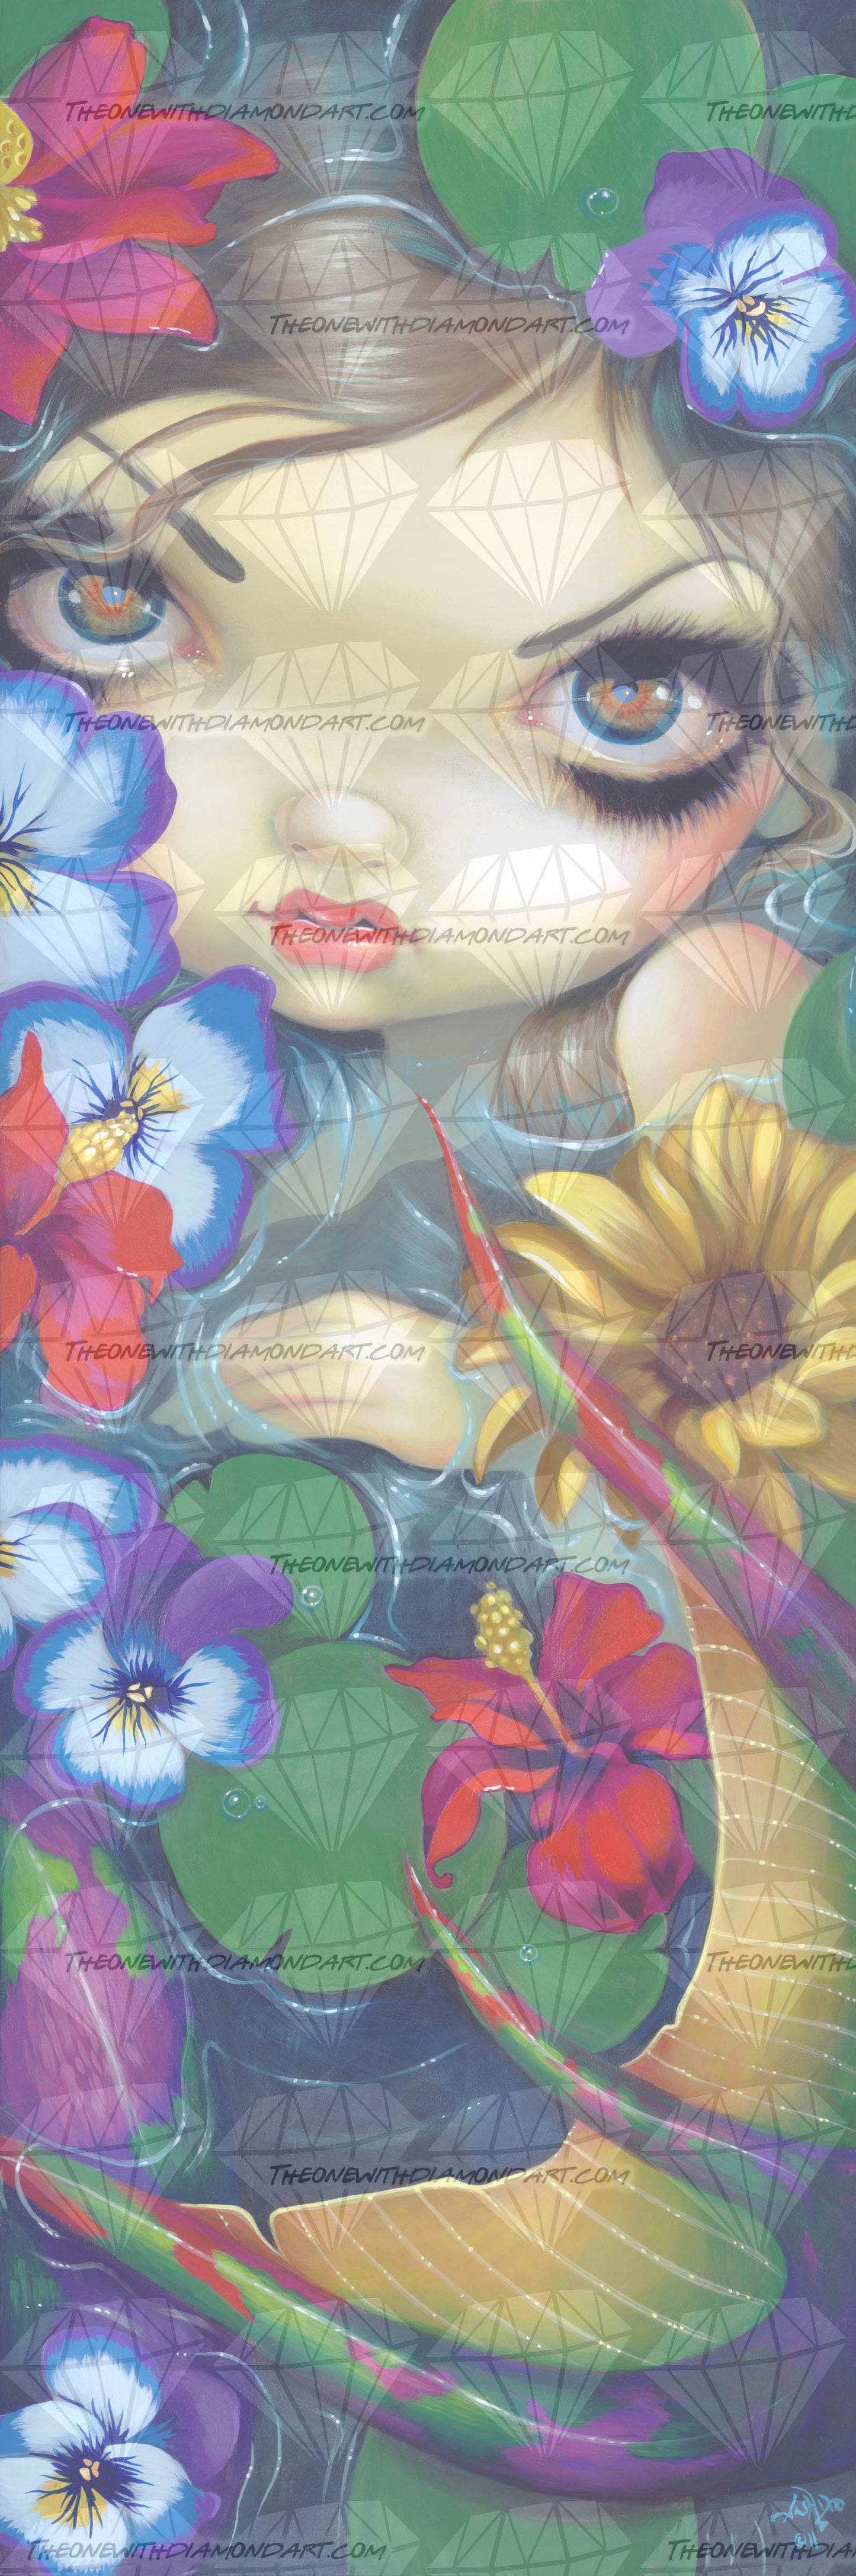 Mermaid With Floating Flowers ©Jasmine Becket-Griffith